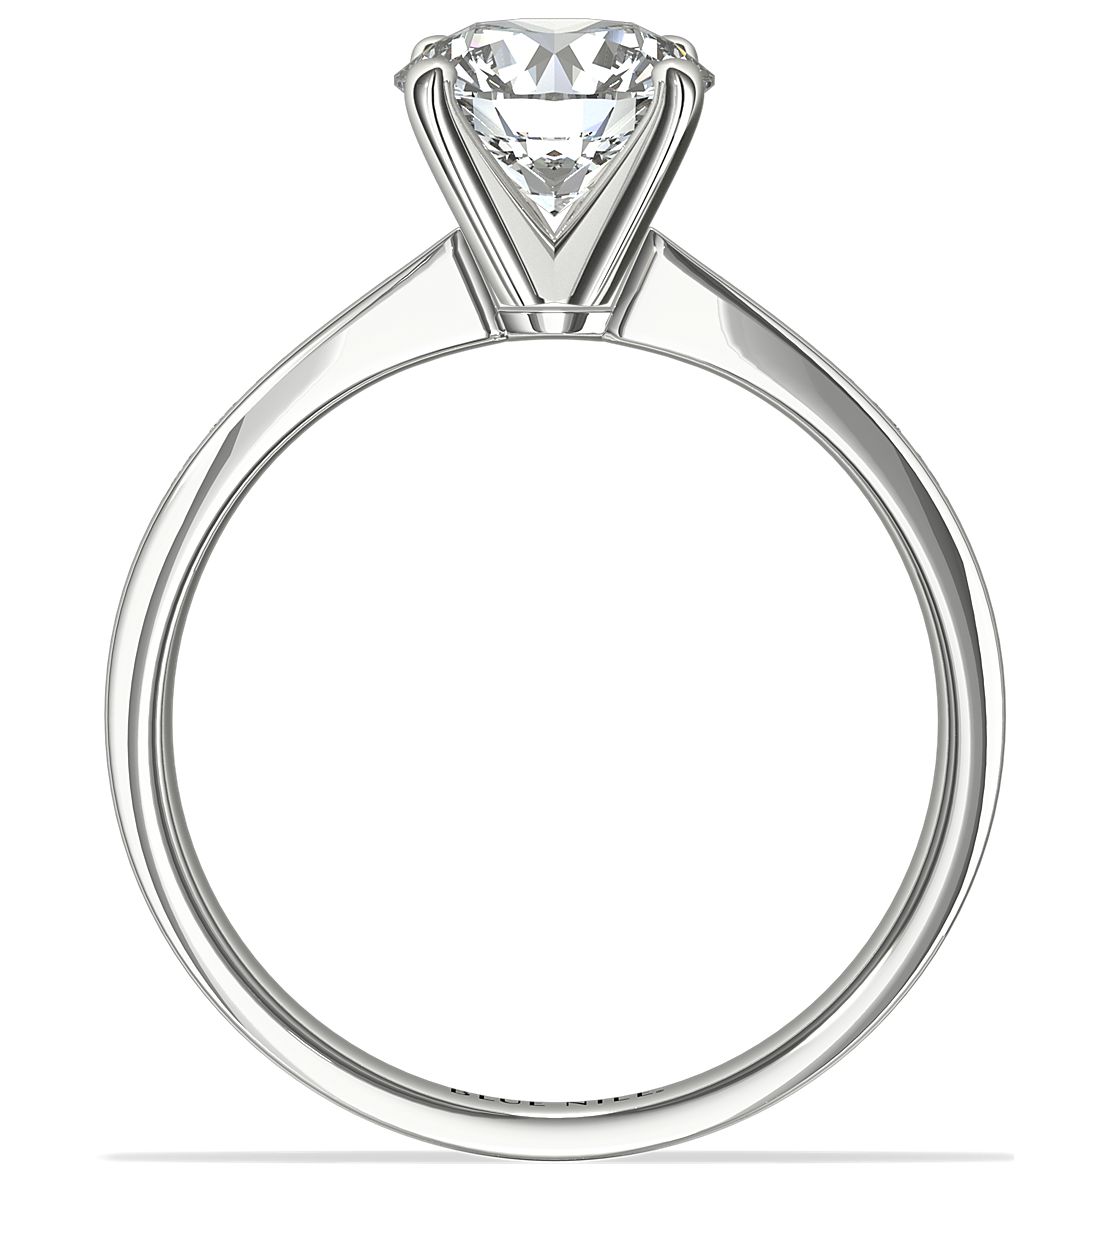 Channel Set Princess Cut Diamond Engagement Ring in 14k White Gold 